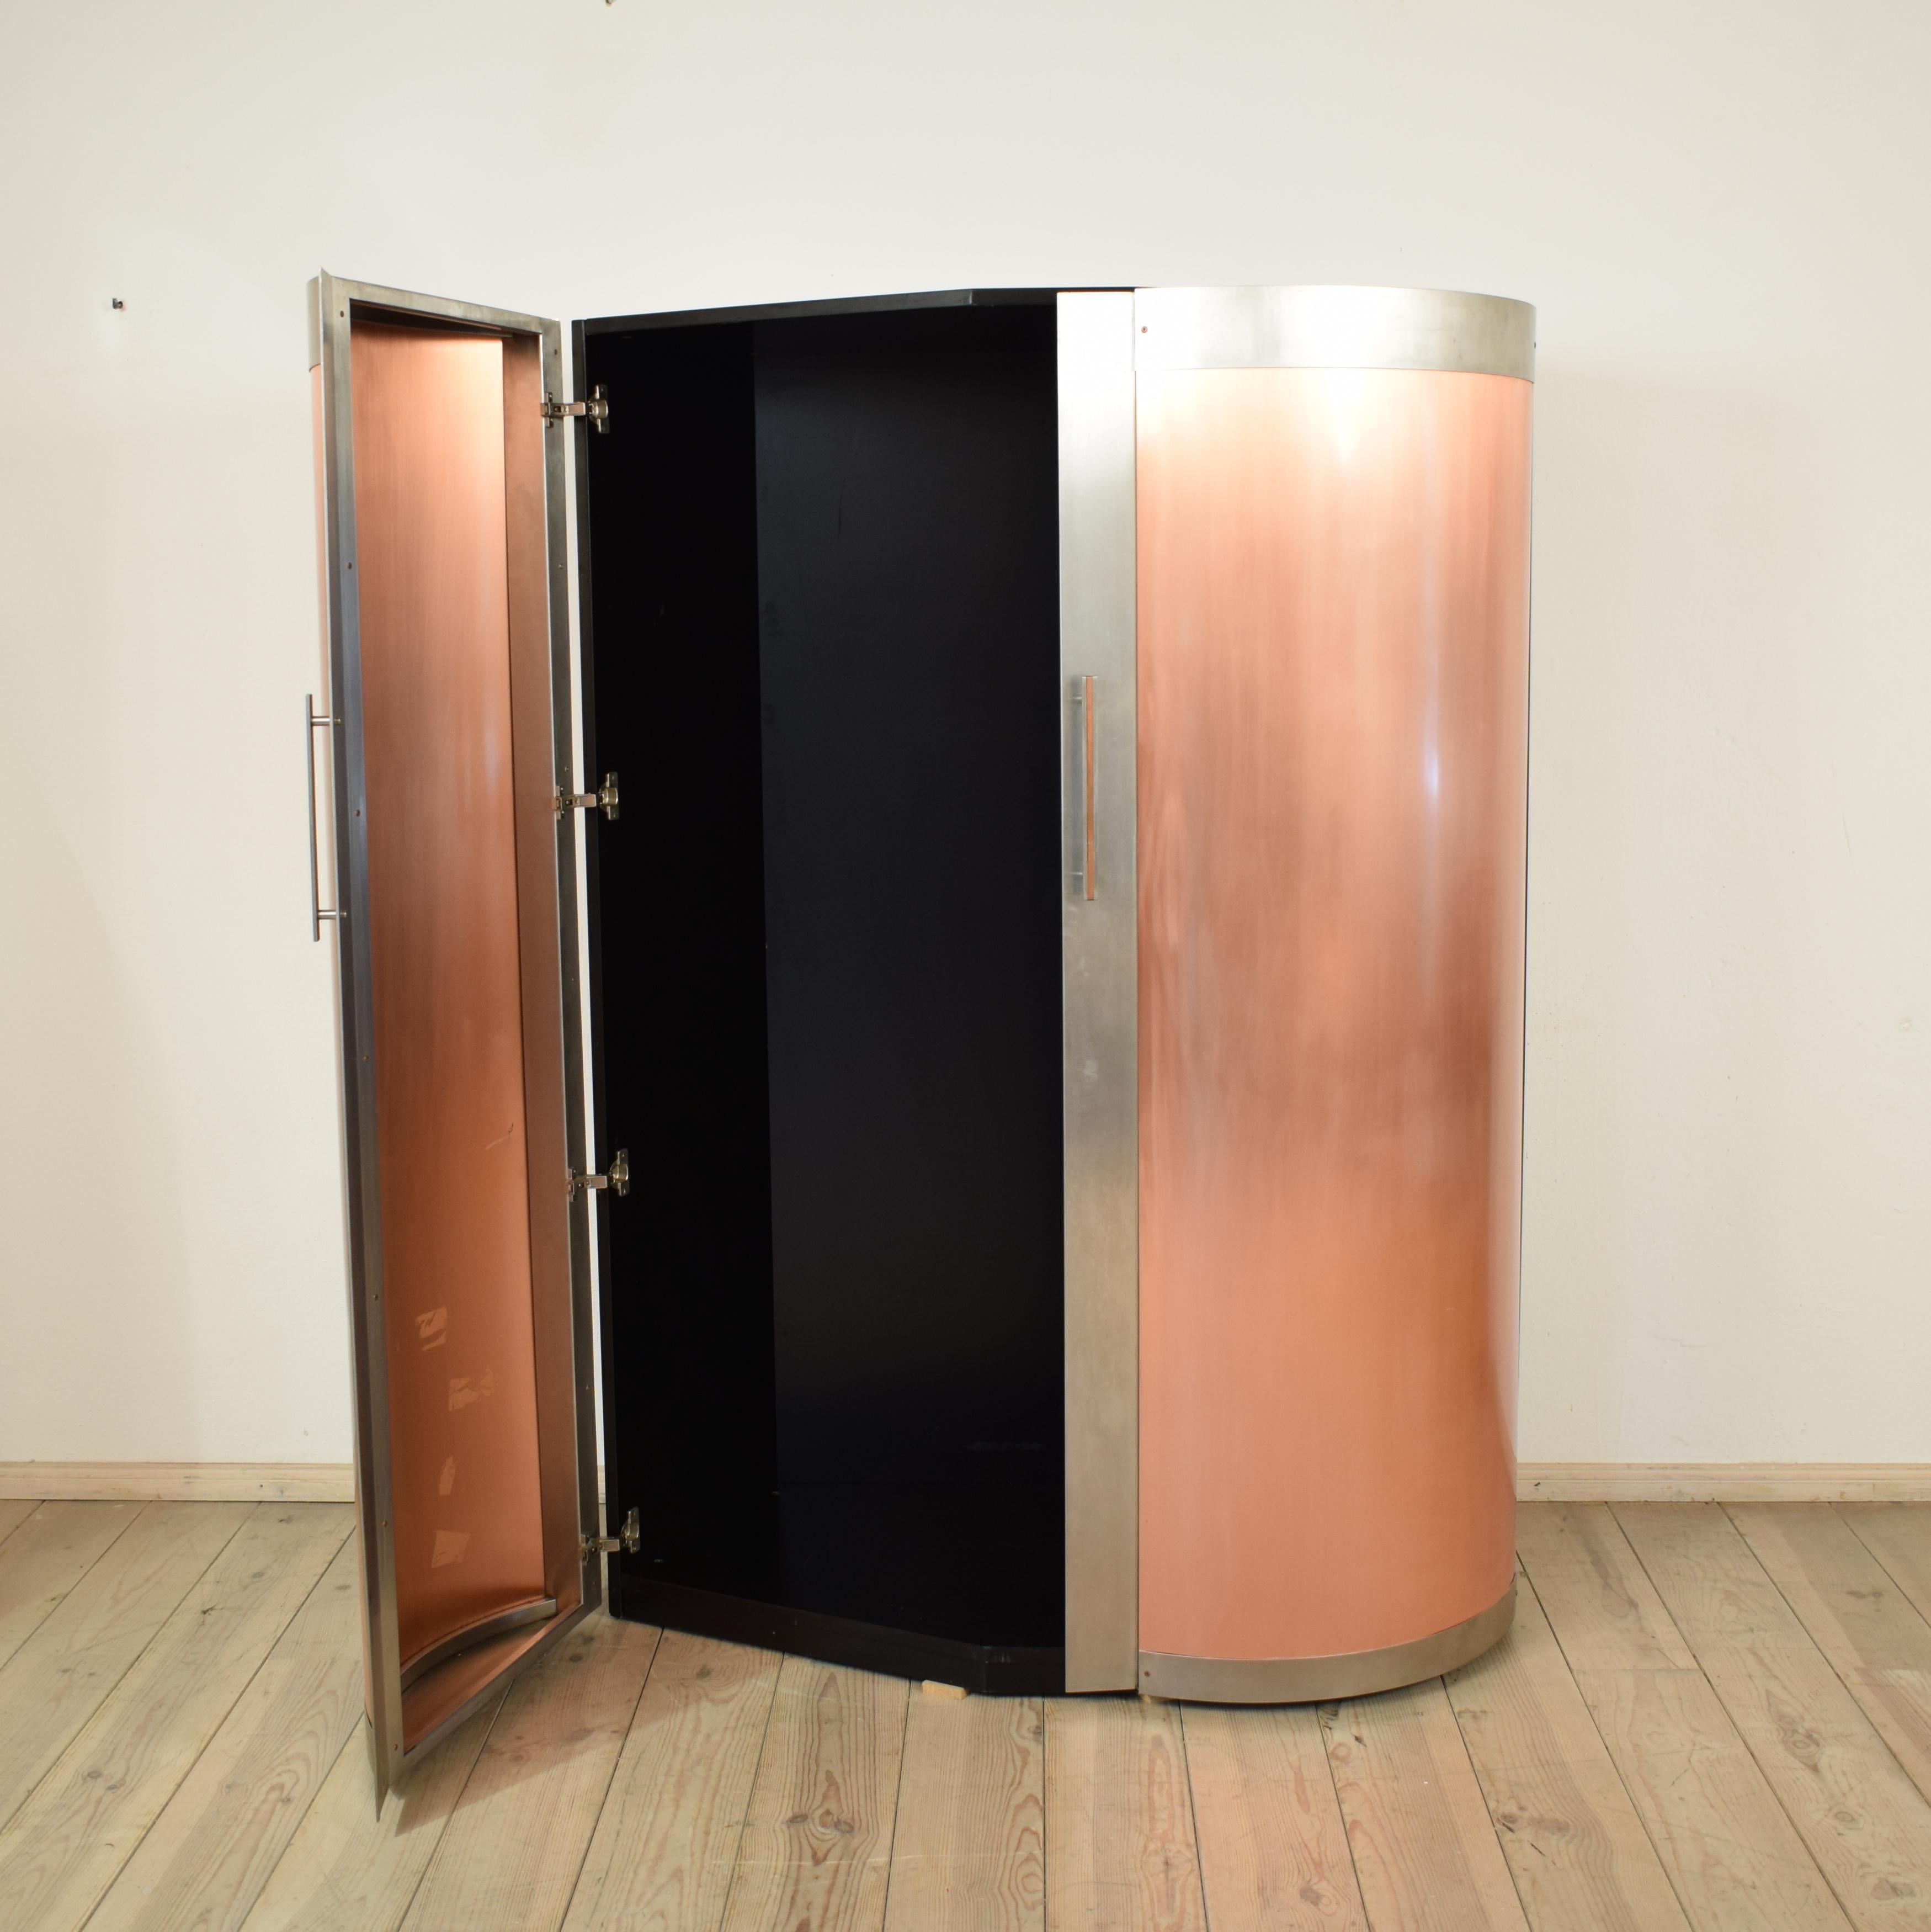 This unique and unusual 1980s corner cabinet / cabinet comes with copper doors.
This rare piece of furniture is a great eyecatcher for every home and gives every interior a special and beautiful look.